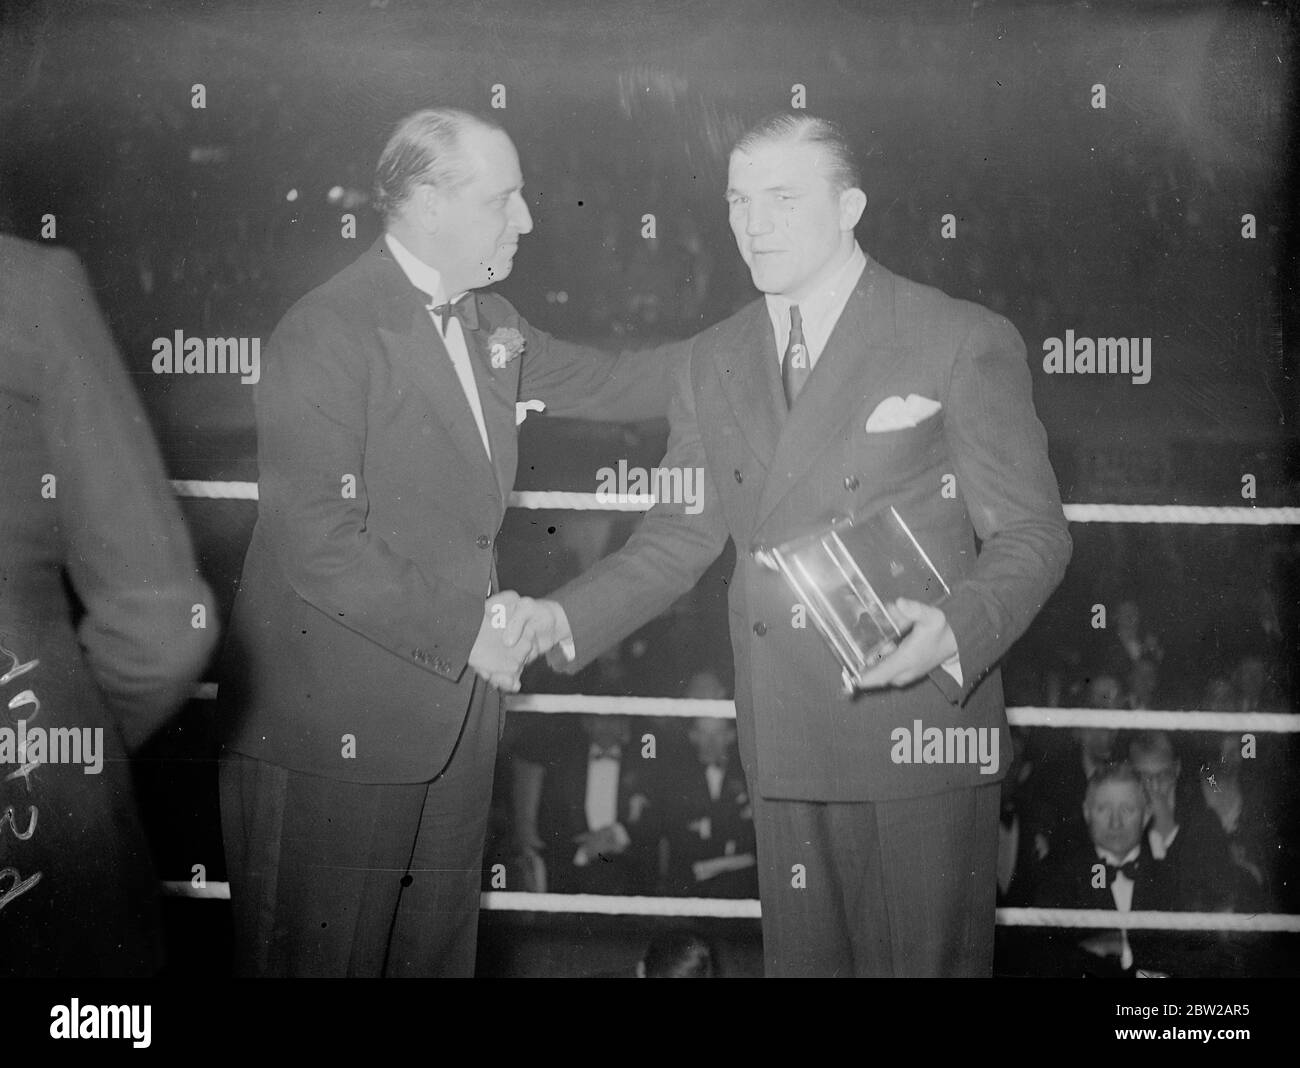 Tommy Farr receives NSC trophy at Wembley. Tommy Farr, British Empire heavyweight champion, attended the fight between Walter Neusel, the German and Maurice Strickland of New Zealand, at the Wembley Arena, London, and received the National Sporting Club Trophy from Sir Noel Curtis Bennett. The trophy was presented for as gallant showing against Joe Louis for the world title. Photo shows, Tommy Farr shaking hands with Sir Noel Curtis Bennett after receiving the trophy at Wembley. 19 October 1937 Stock Photo